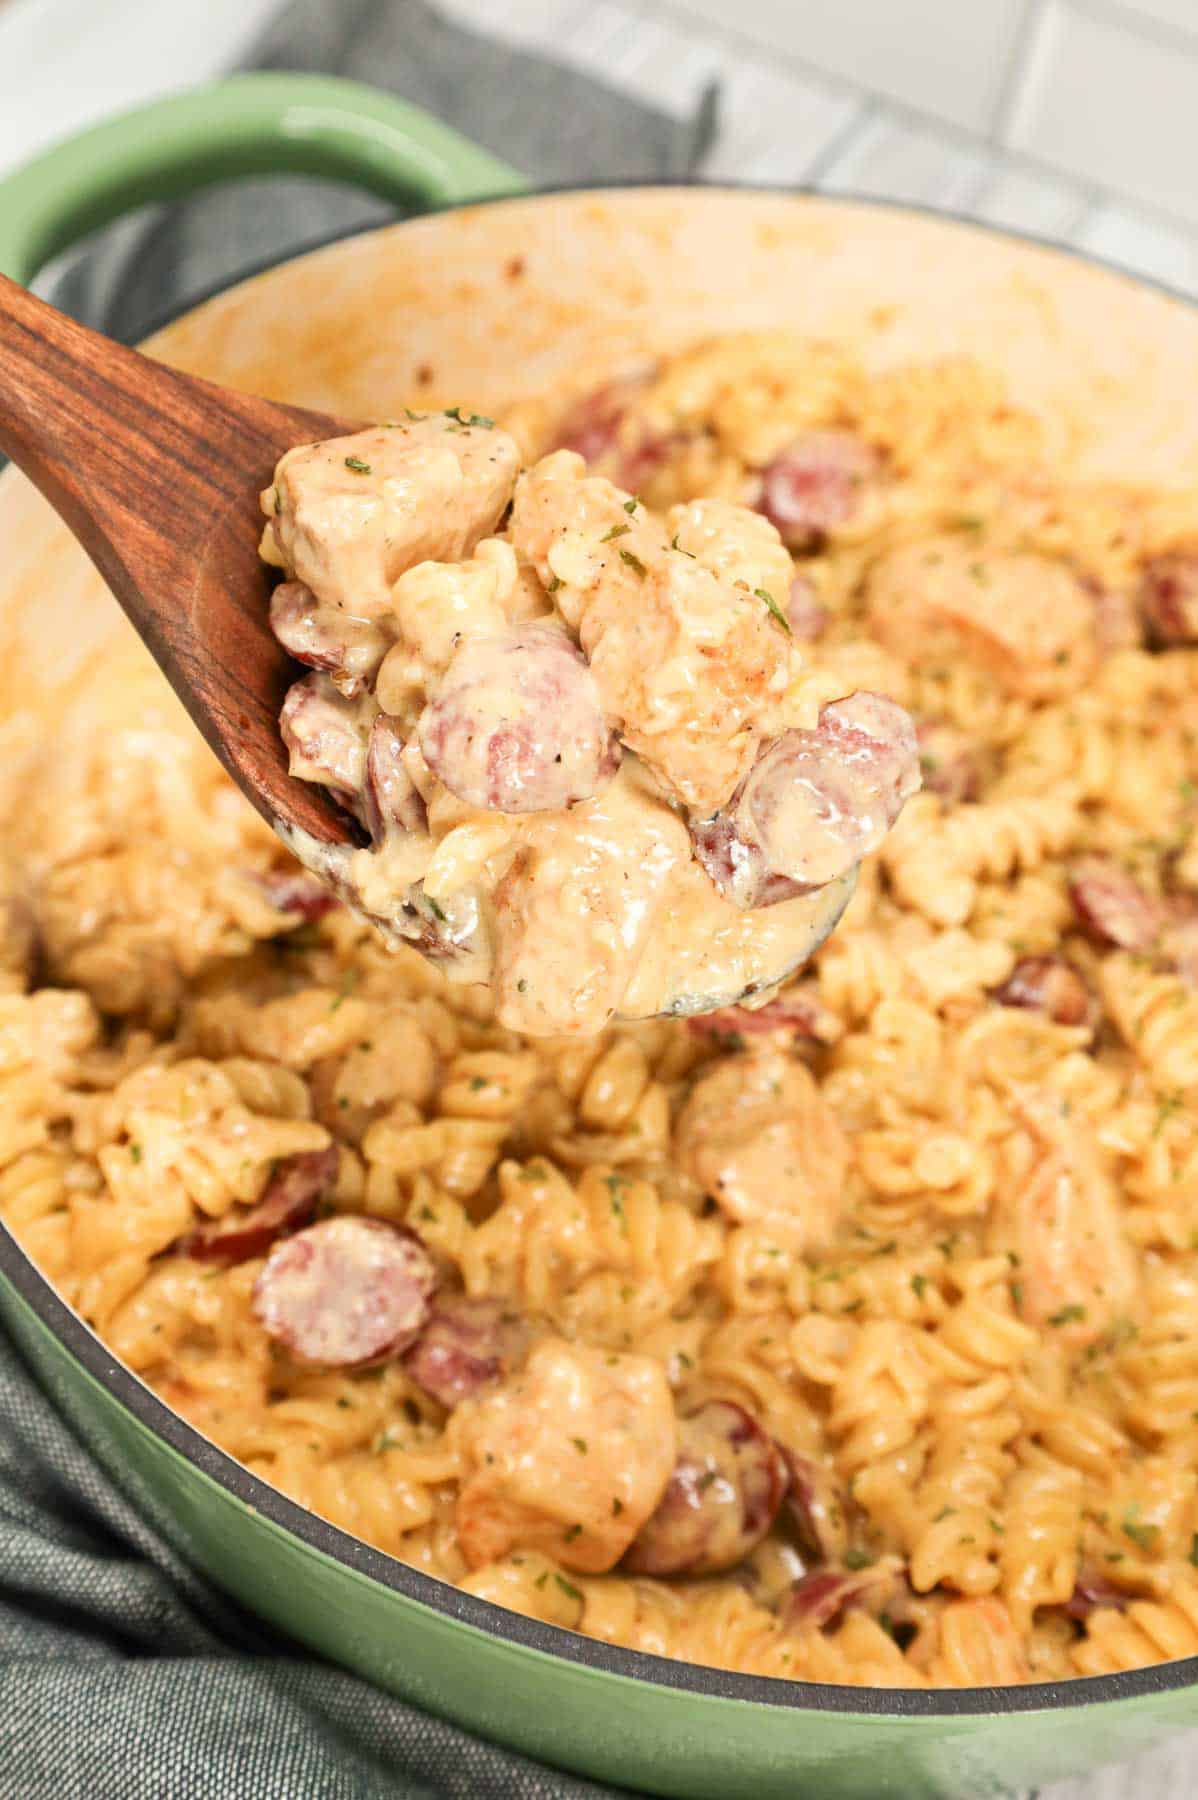 Chicken and Sausage Alfredo is a hearty pasta dish loaded with chunks of chicken breast and smoked sausage slices all tossed in a creamy garlic parmesan sauce with a hint of Cajun seasoning.